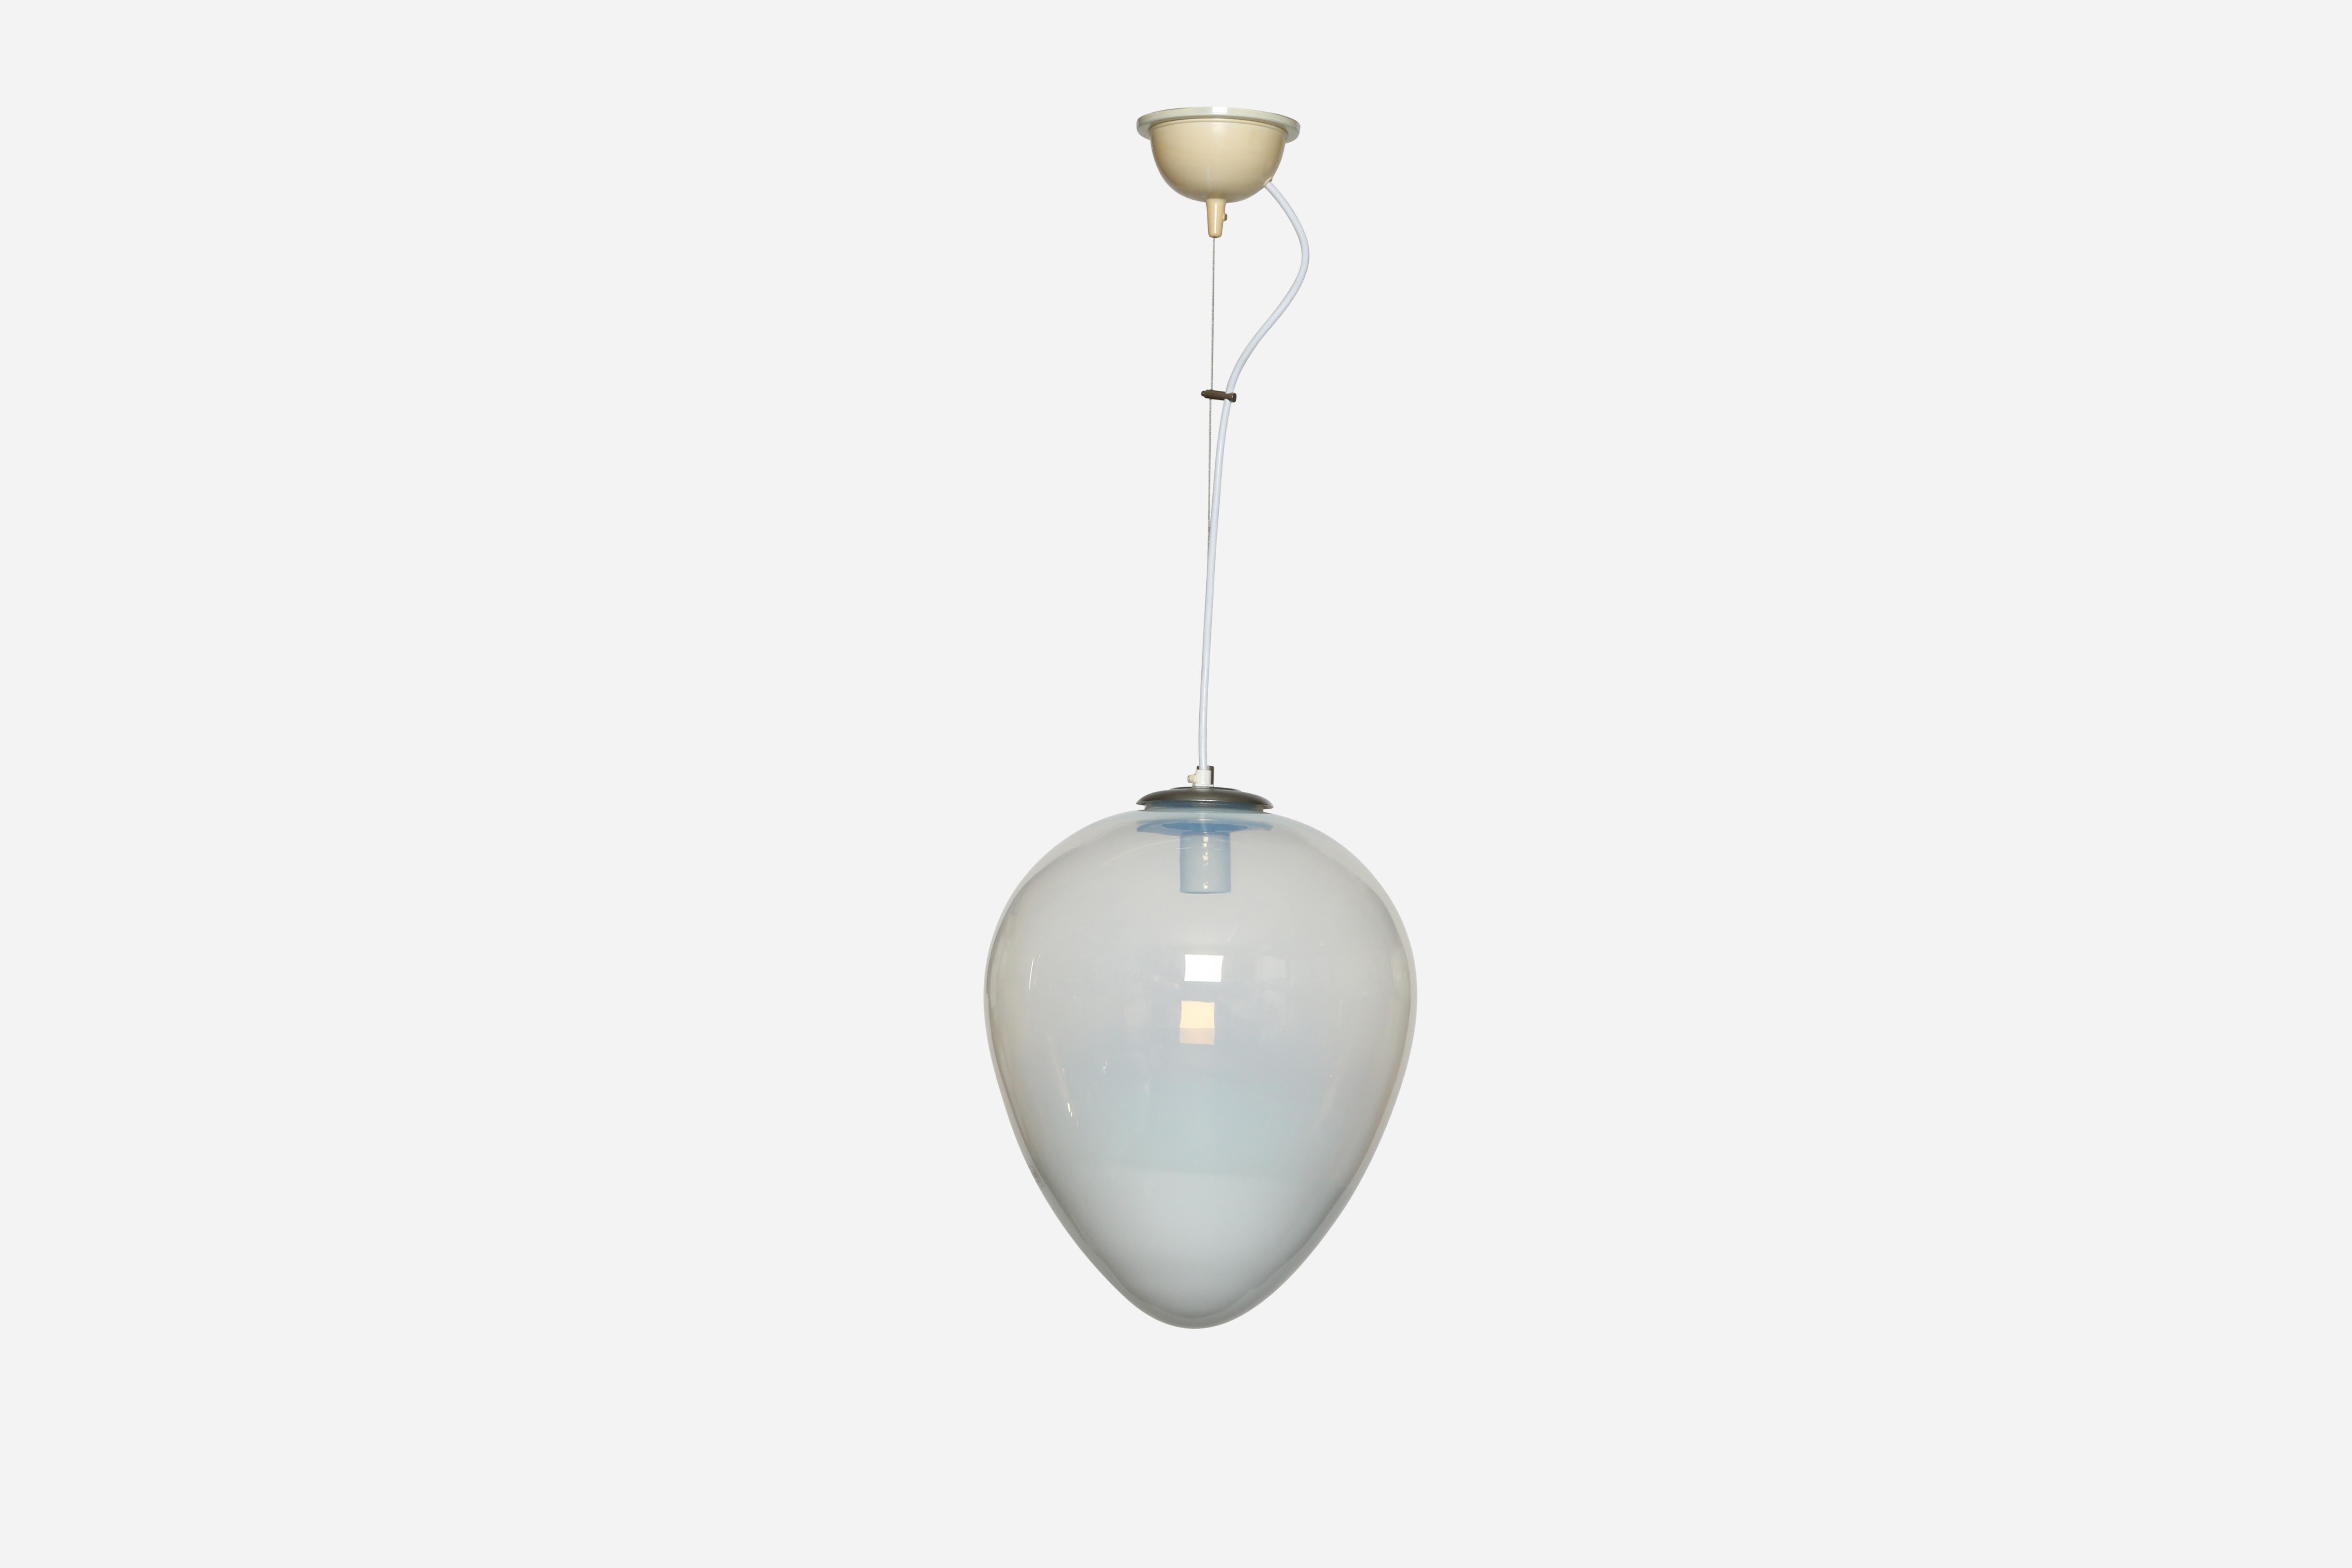 Murano glass ceiling pendant by Leucos.
Made in Italy in 1970s.
Handblown glass.
Rewired for US.
Takes one medium base bulb.
Overall drop is adjustable, can be shorter.
2 ceiling pendants are available.
Price is for 1 pendant.